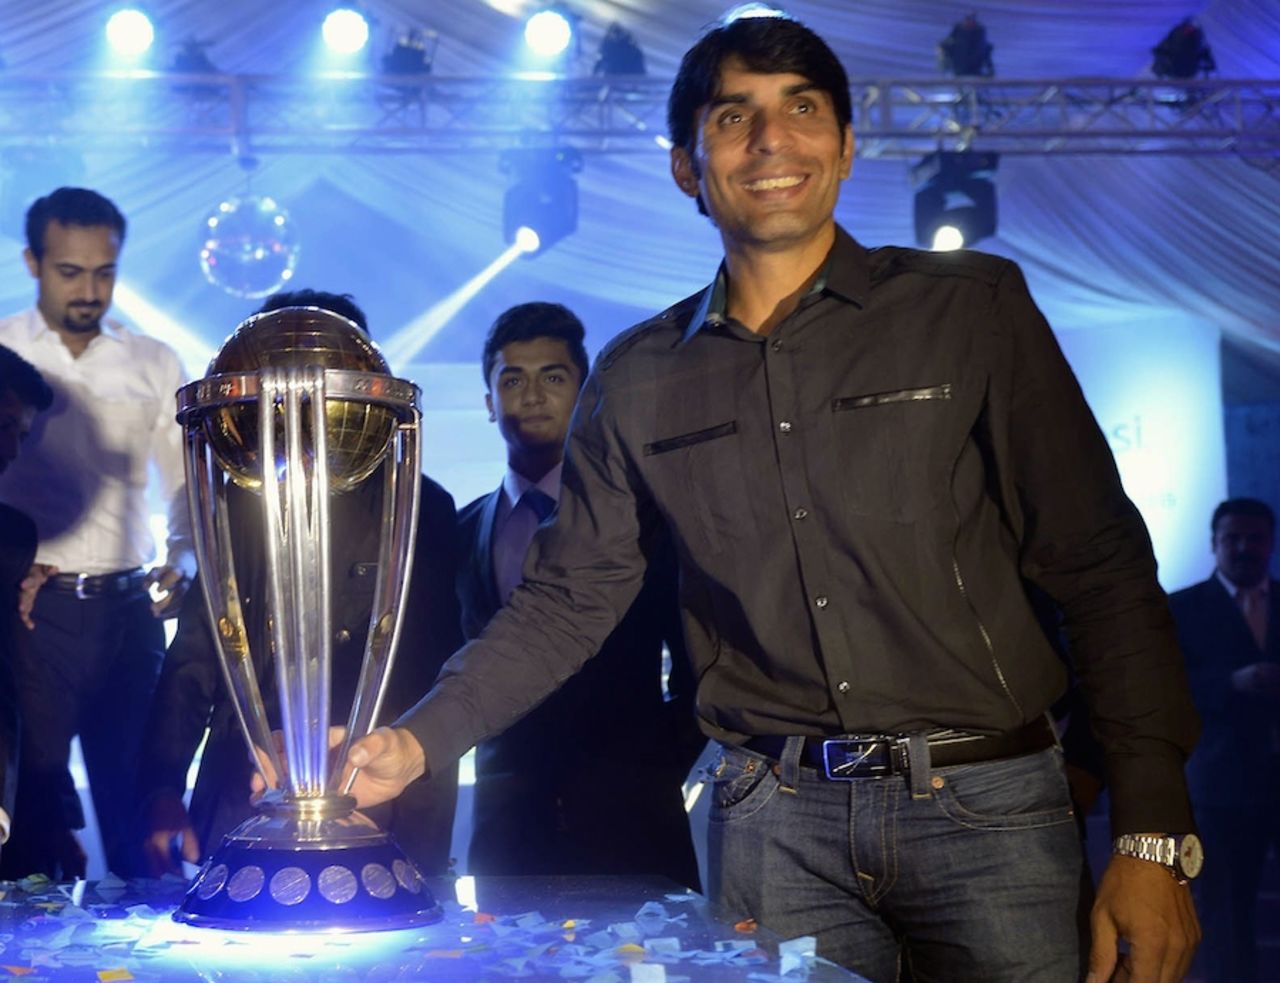 Pakistan captain Misbah-ul-Haq poses with the World Cup trophy, Lahore, September 16, 2014